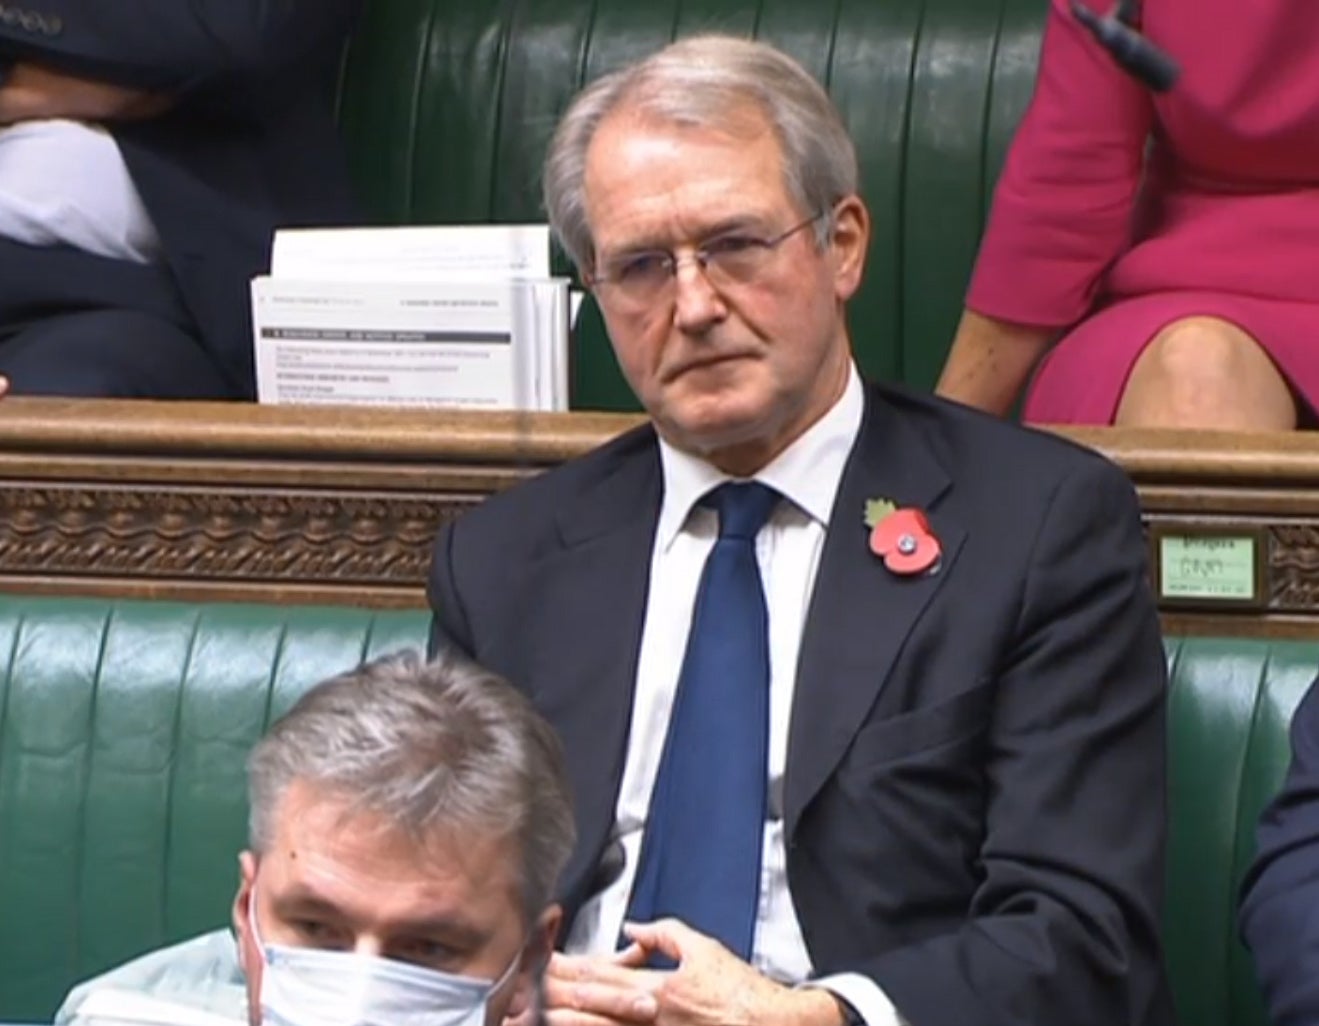 Owen Paterson, listening to debate about whether he should be suspended